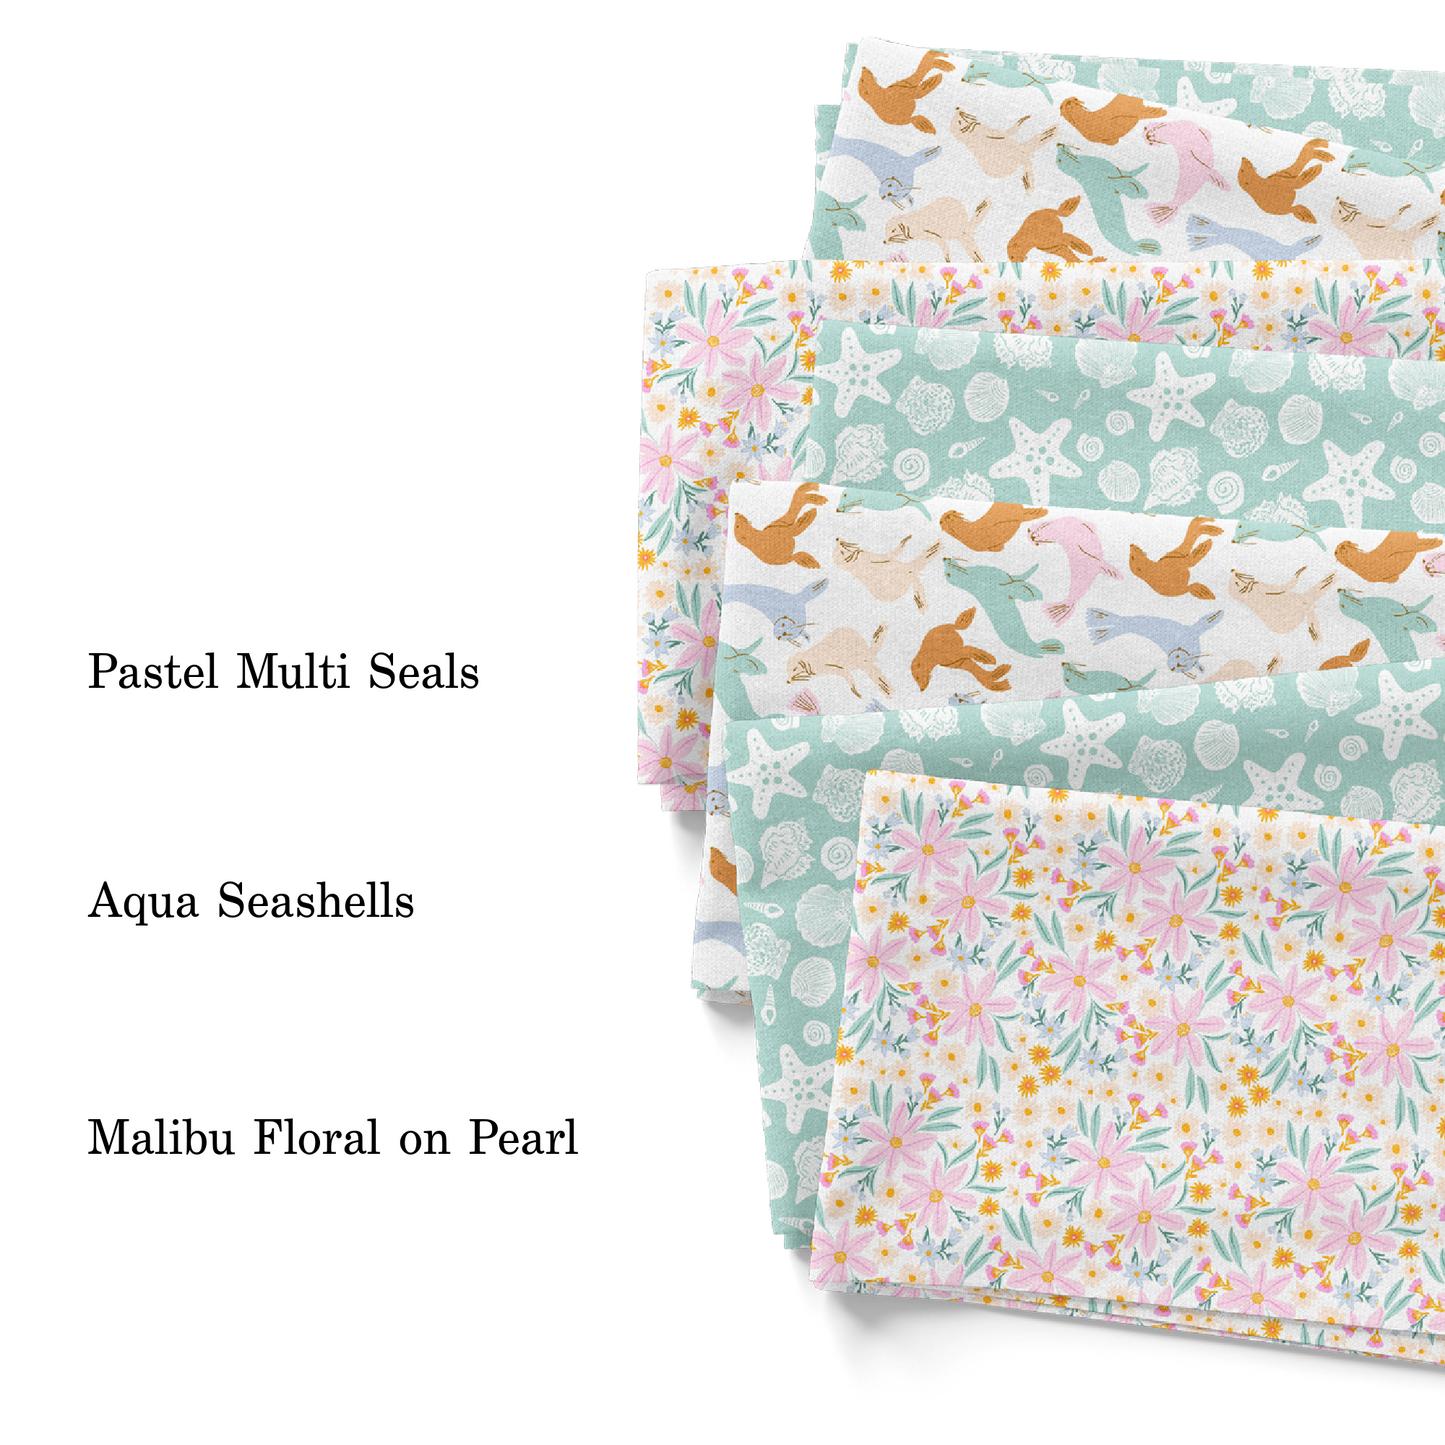 Indy Bloom summer fabric collection with floral, animal, and seashells patterns. 